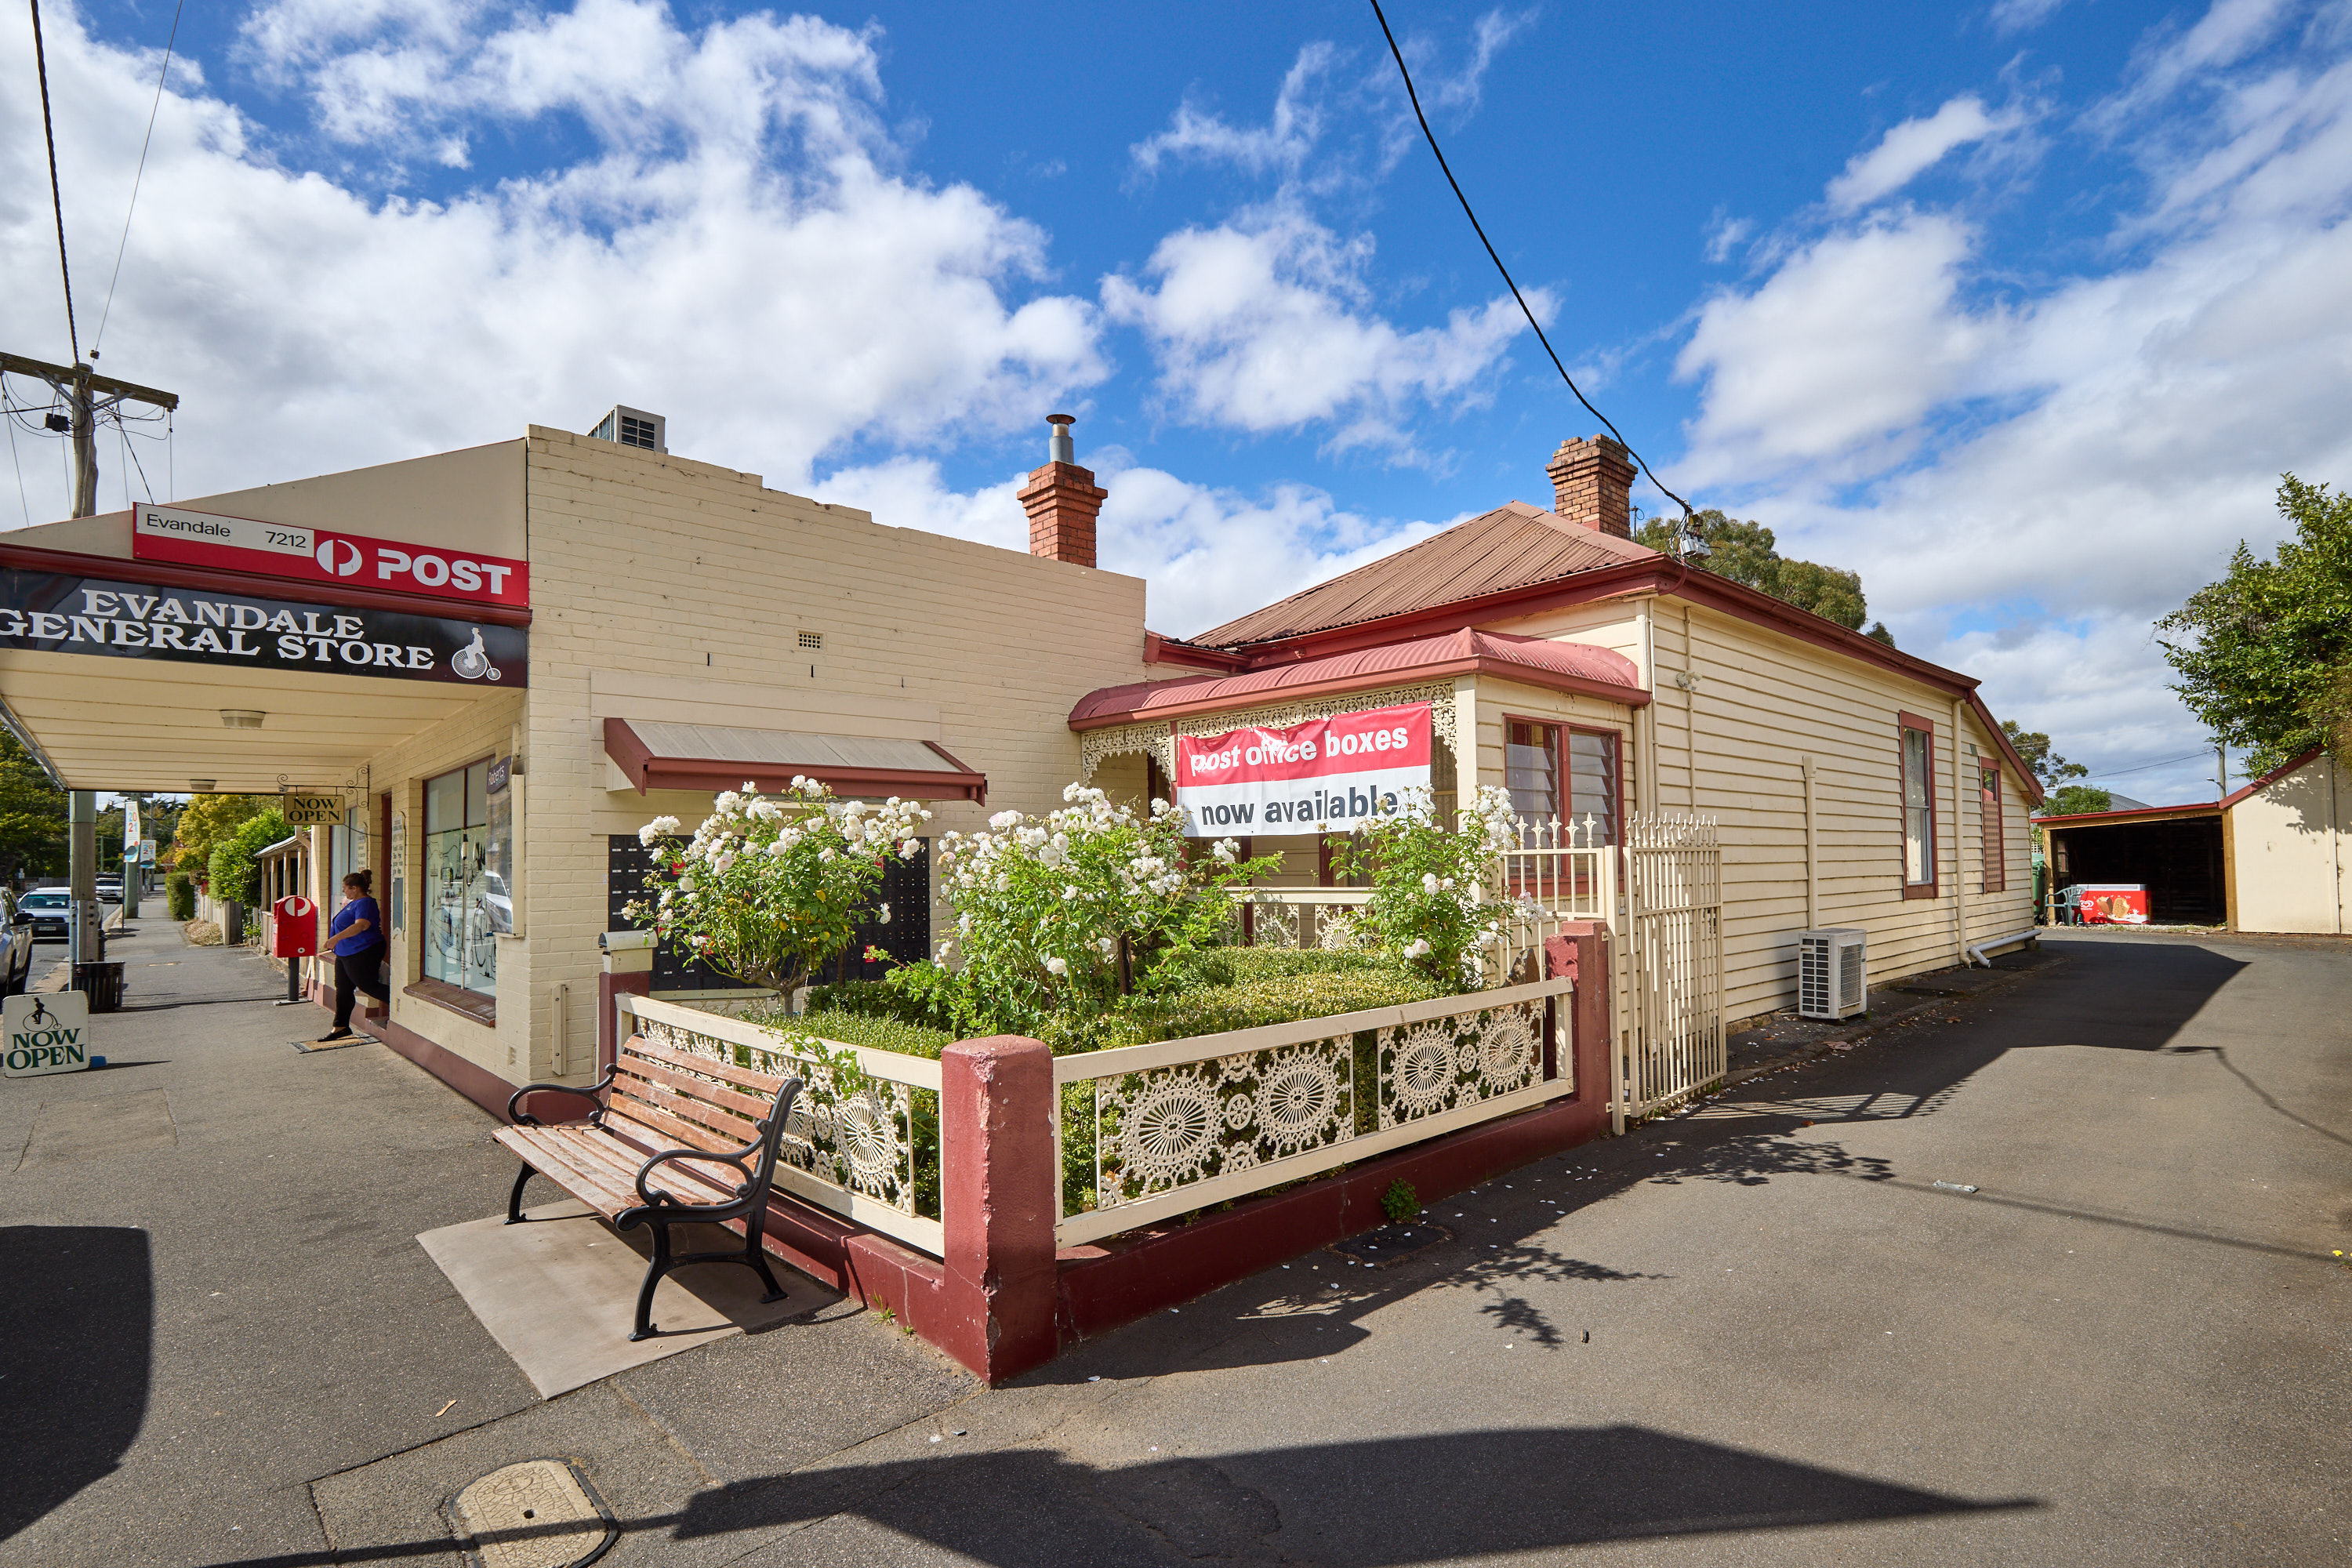 Evandale General Store & Post Office image 2